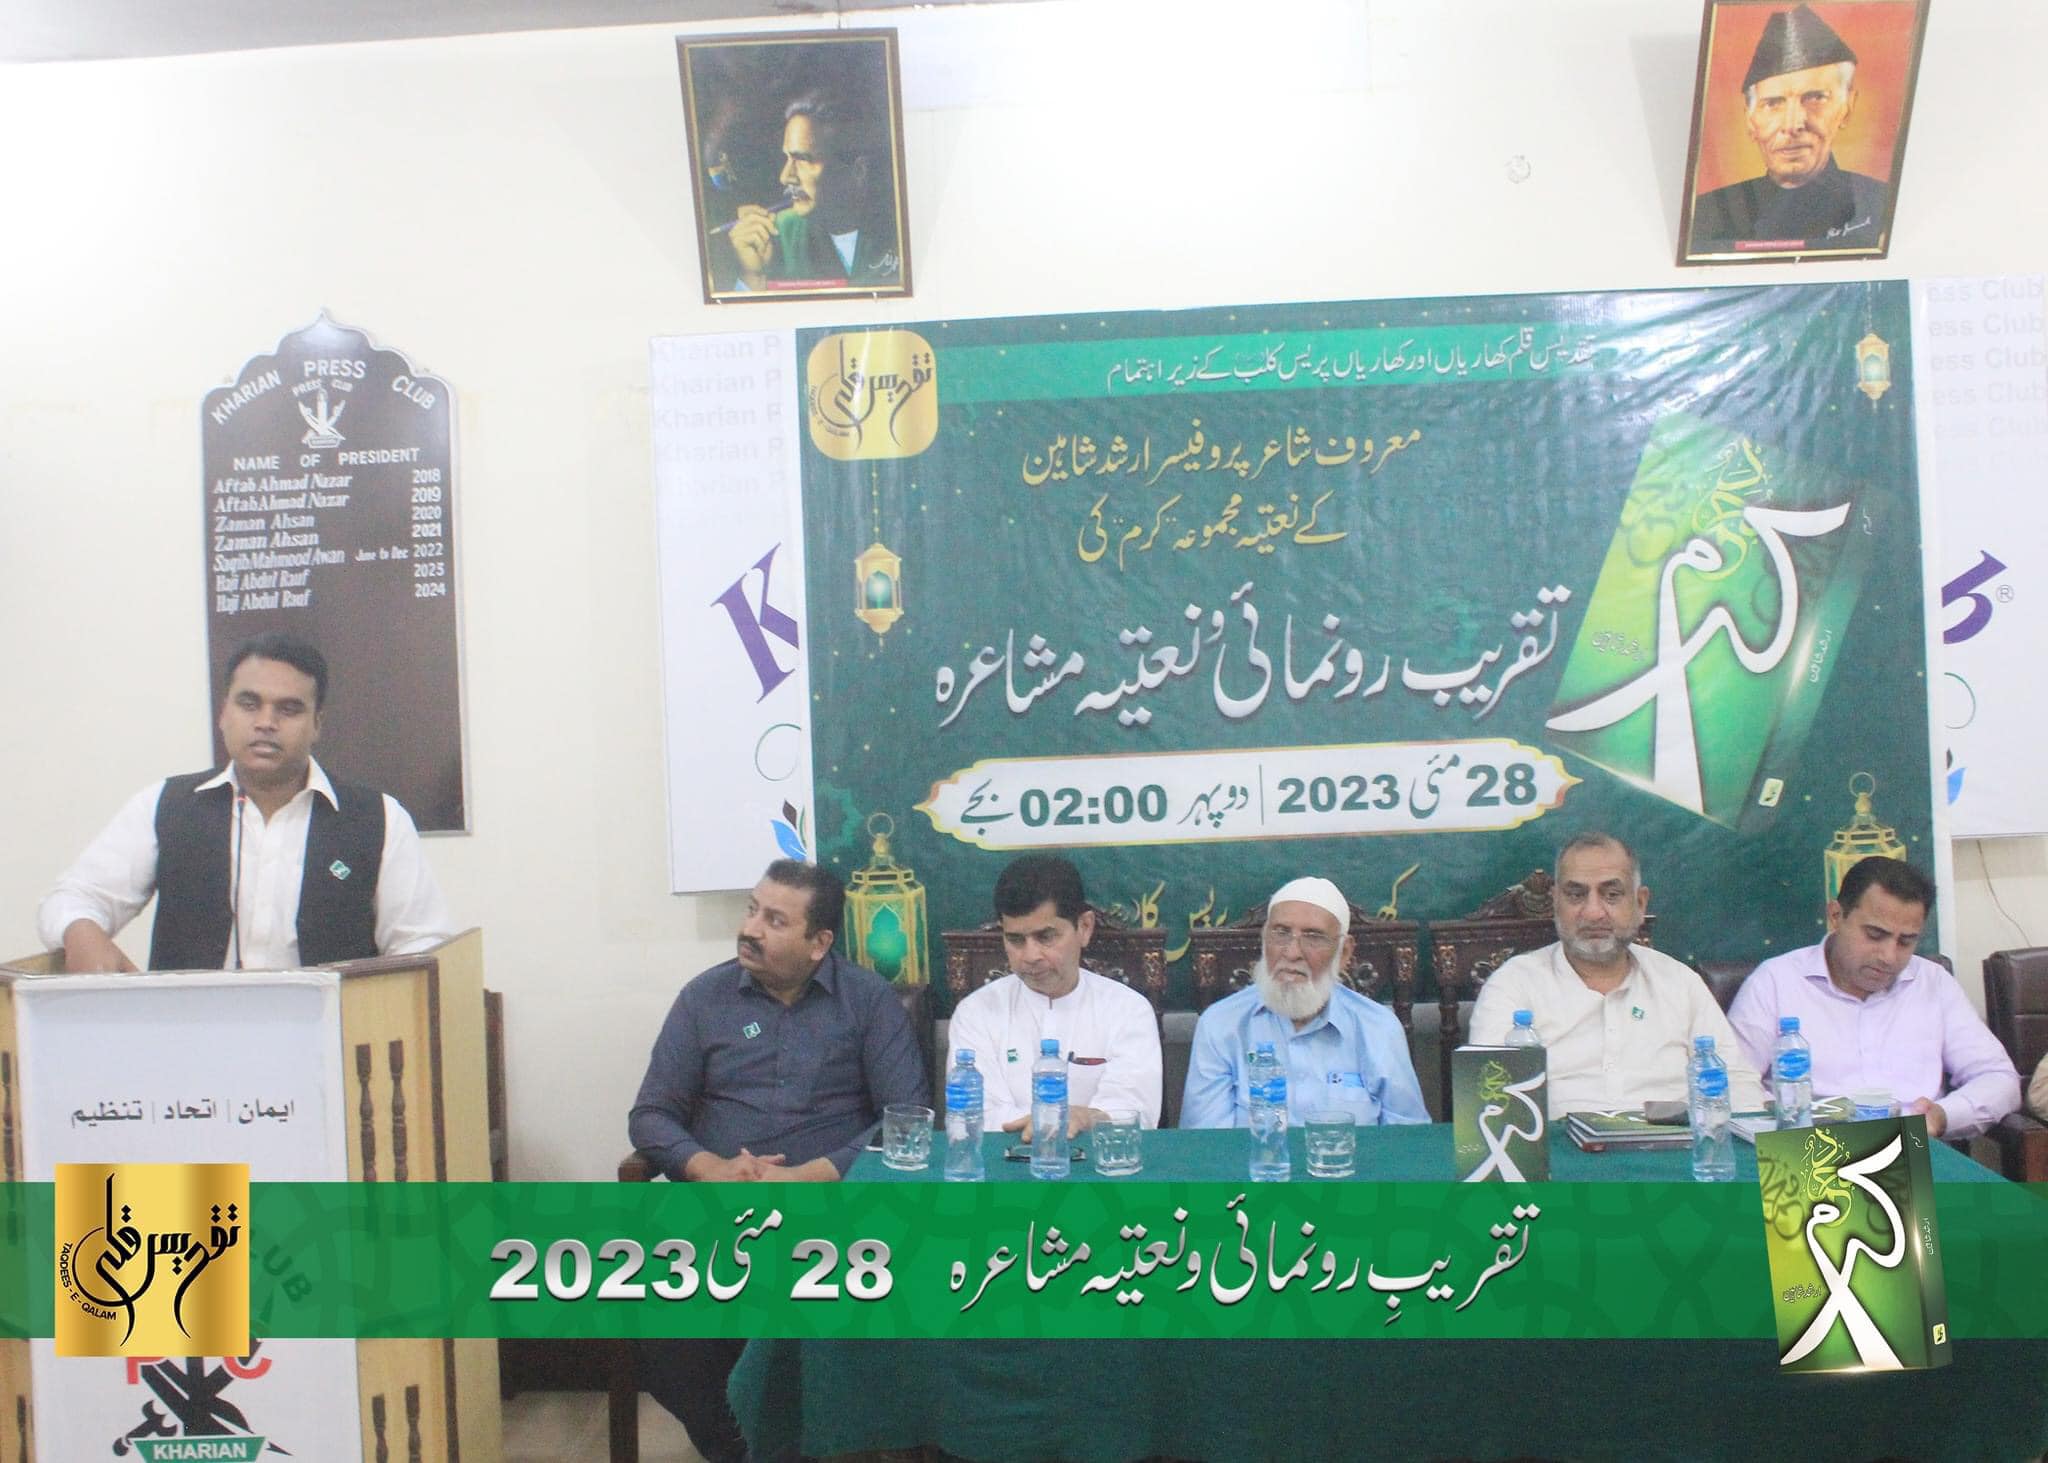 "Karam" Naat Collection Unveiled, Celebrating Poetry and Devotion at Press Club Khariyan